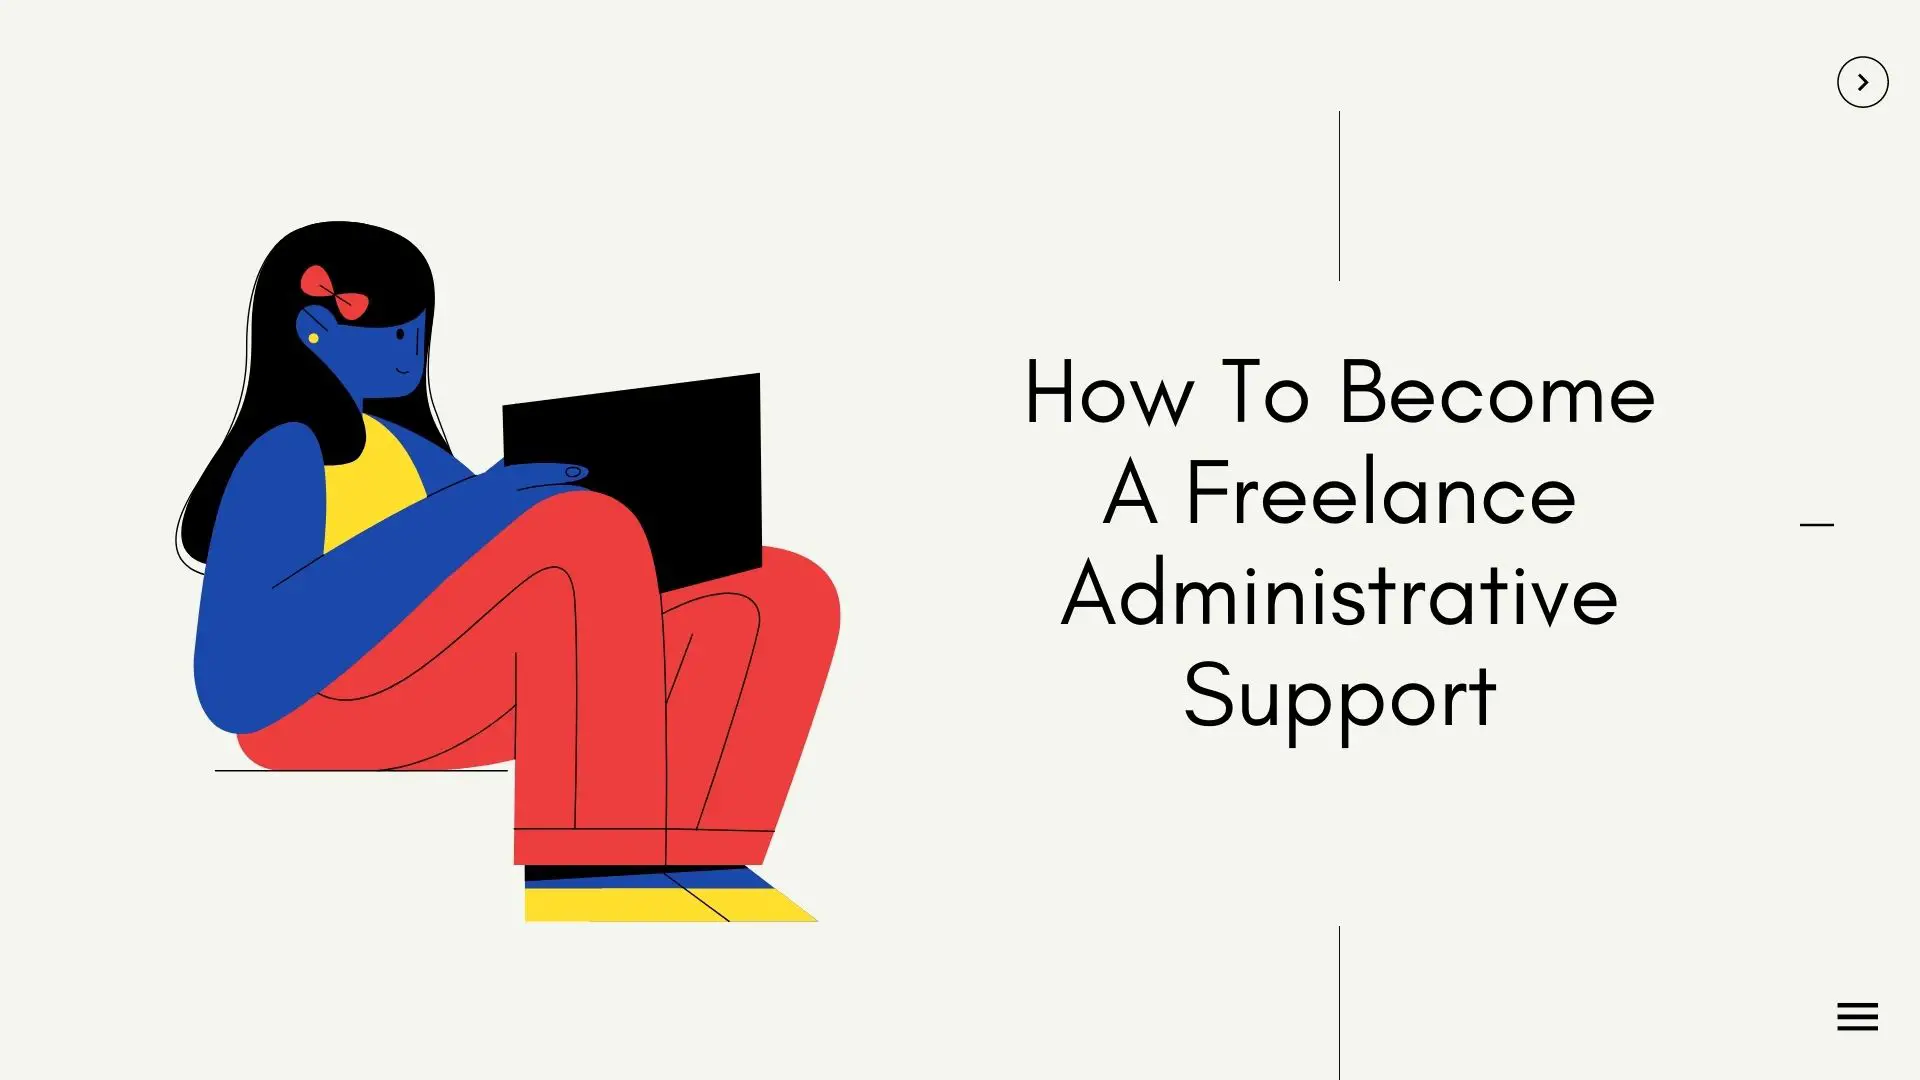 How To Become A Freelance Administrative Support